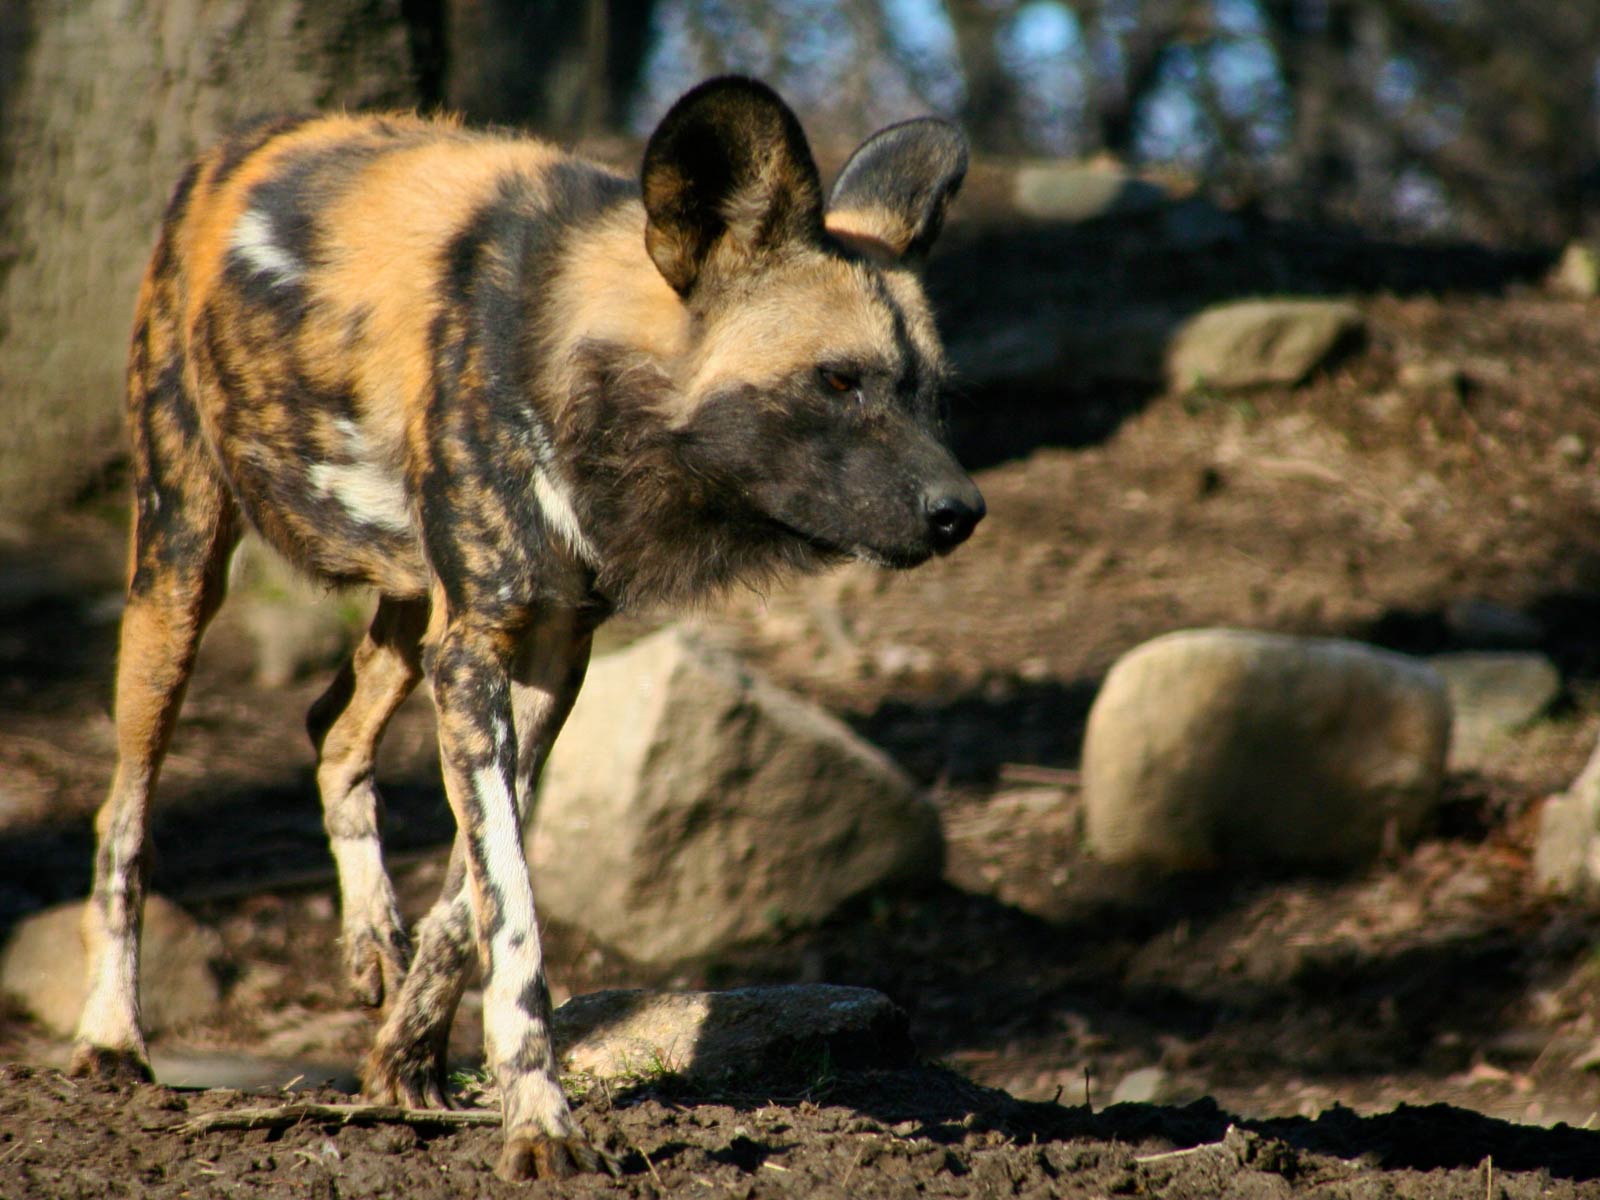 free African Wild Dog wallpaper wallpapers download